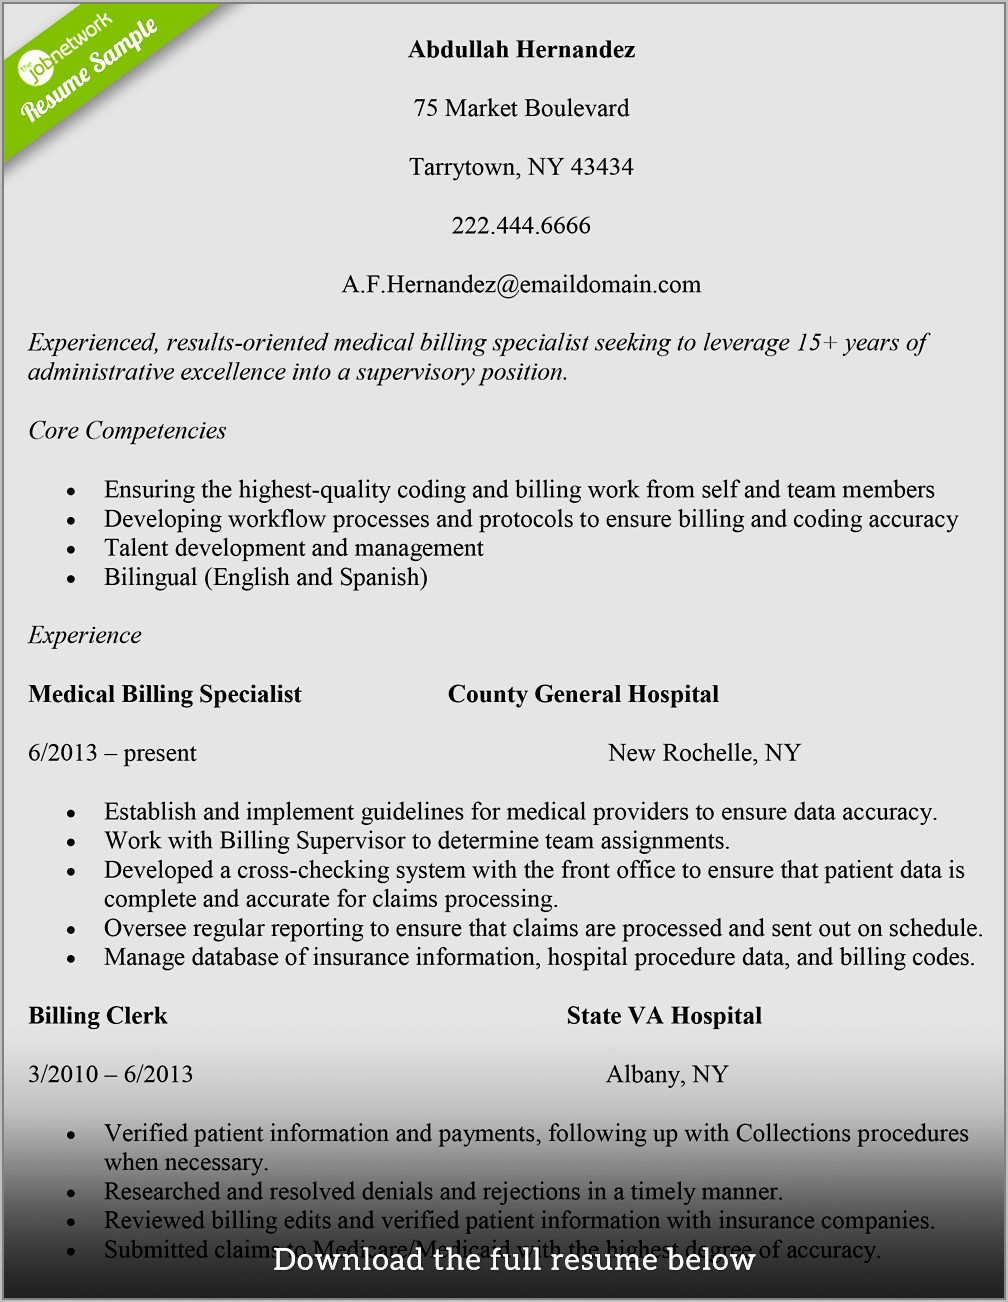 Functional Resume For Medical Billing And Coding